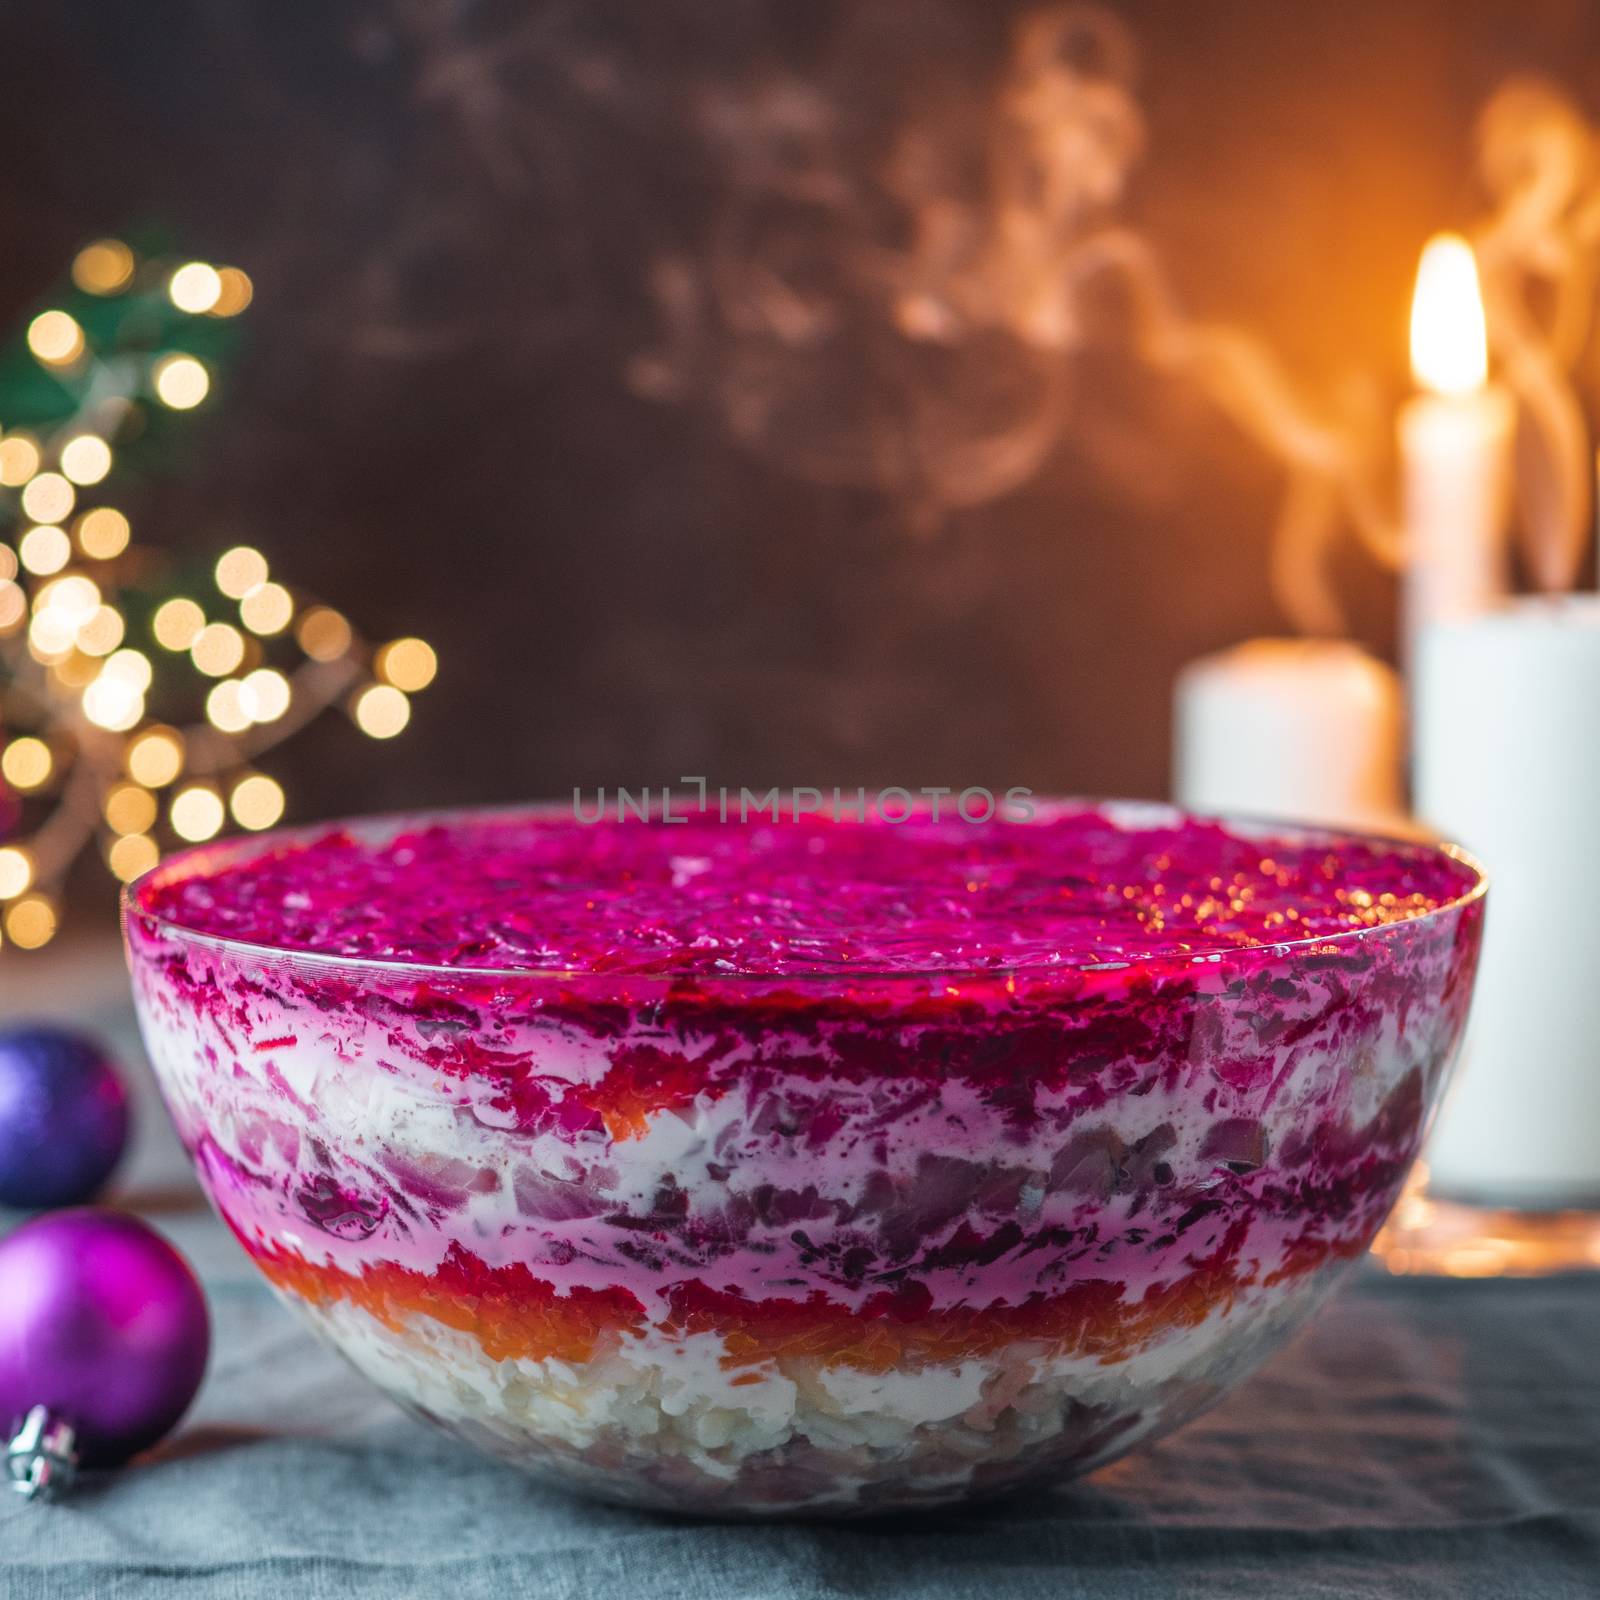 Layered salad herring under a fur coat on festive table, with candle, fir tree and light garland. Traditional russian salad with herring and vegetables in glass bowl. Copy space for text.